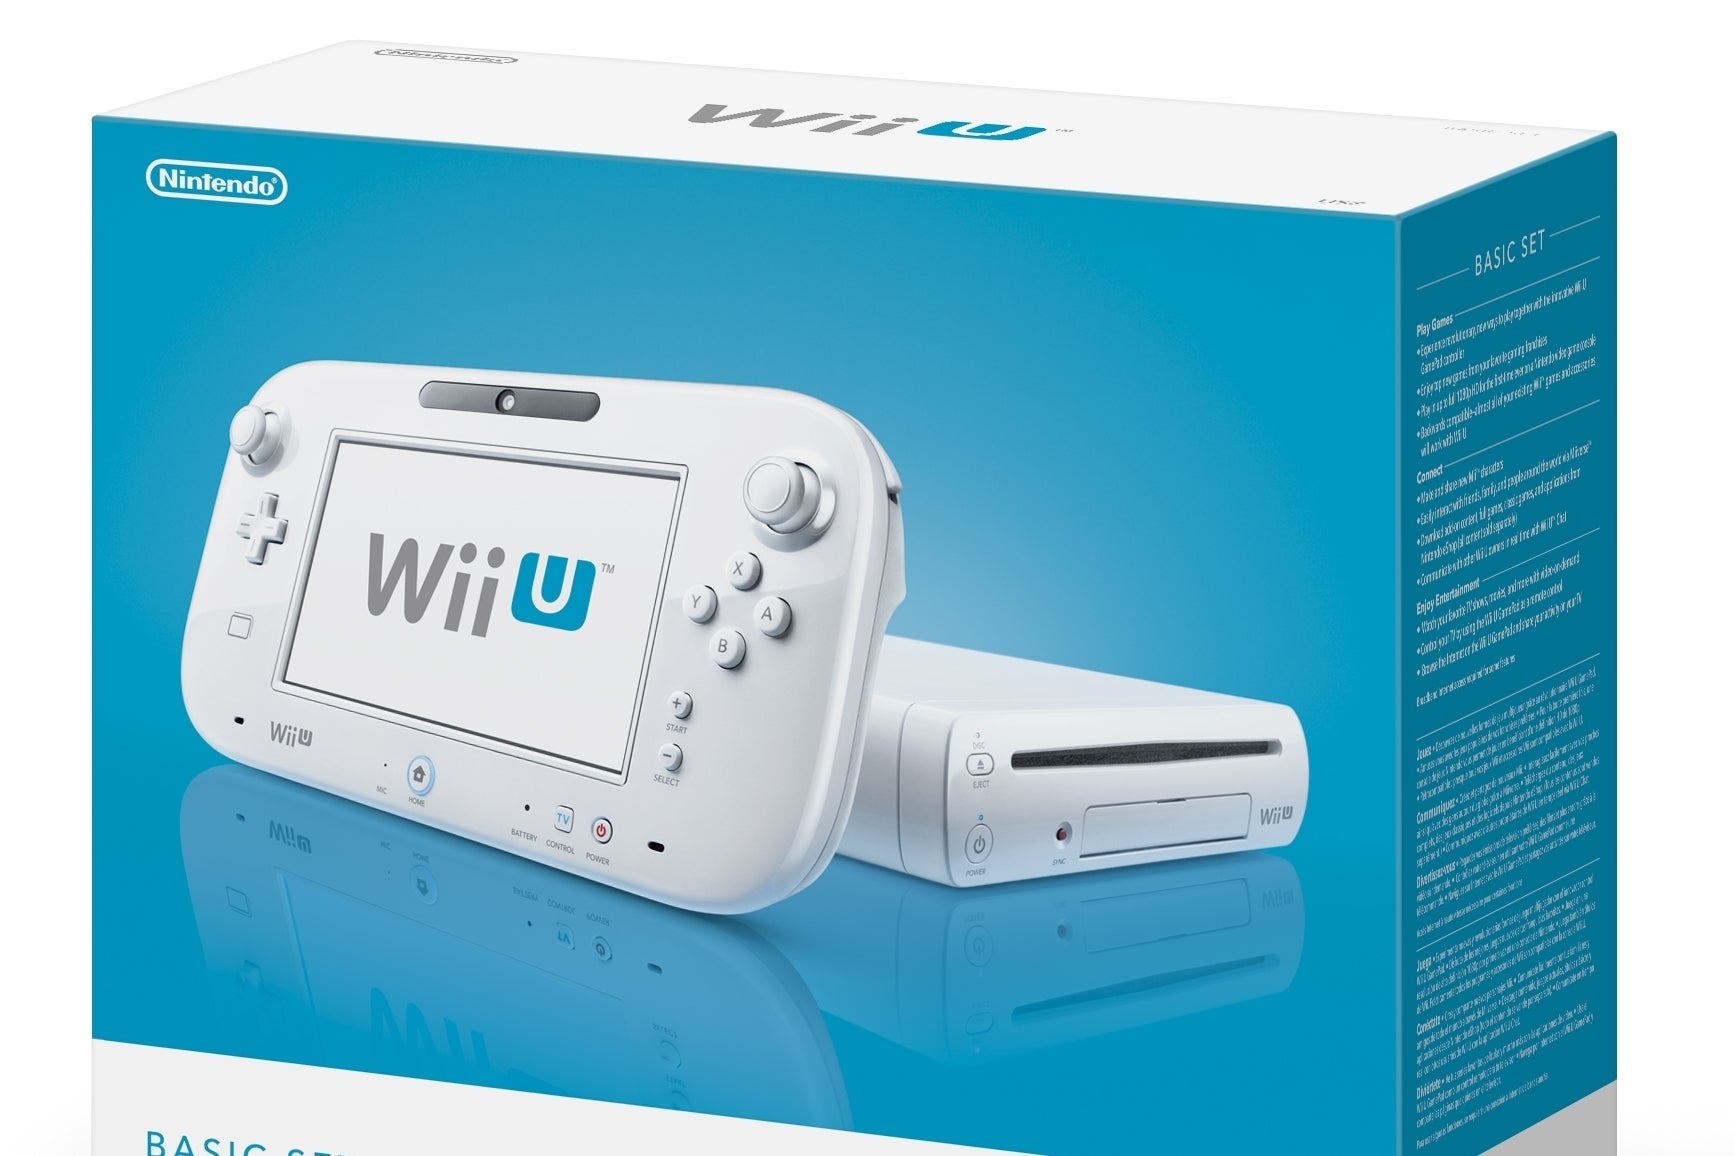 Image for Wii U Basic stock to become "limited" in UK